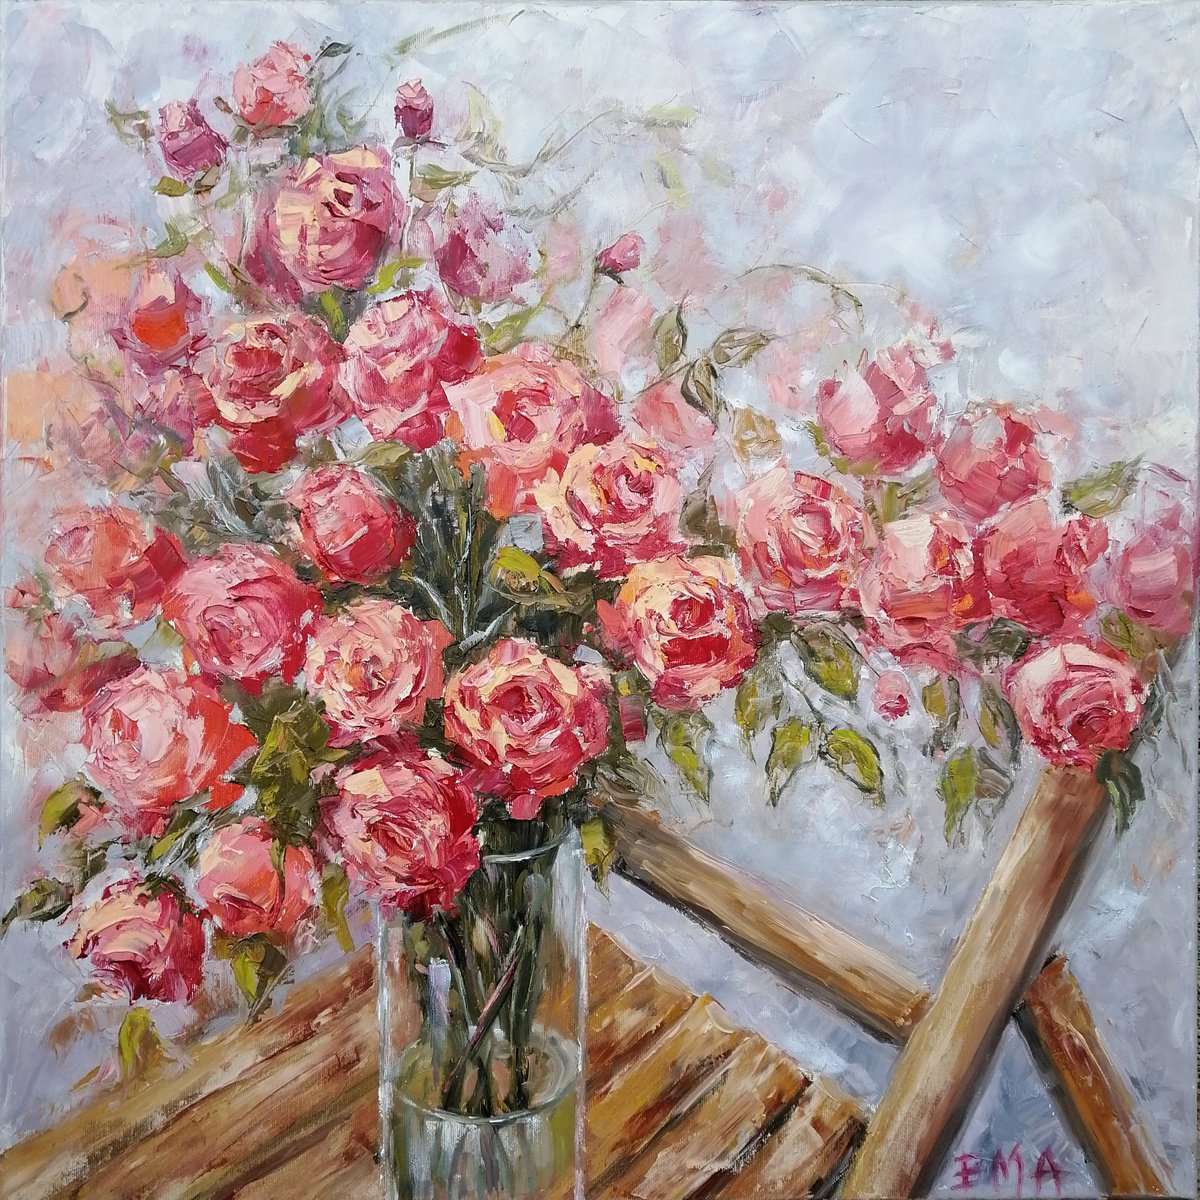 ROSES ON A CHAIR, 70x70cm, blooming roses oil floral still life painting by Emilia Milcheva